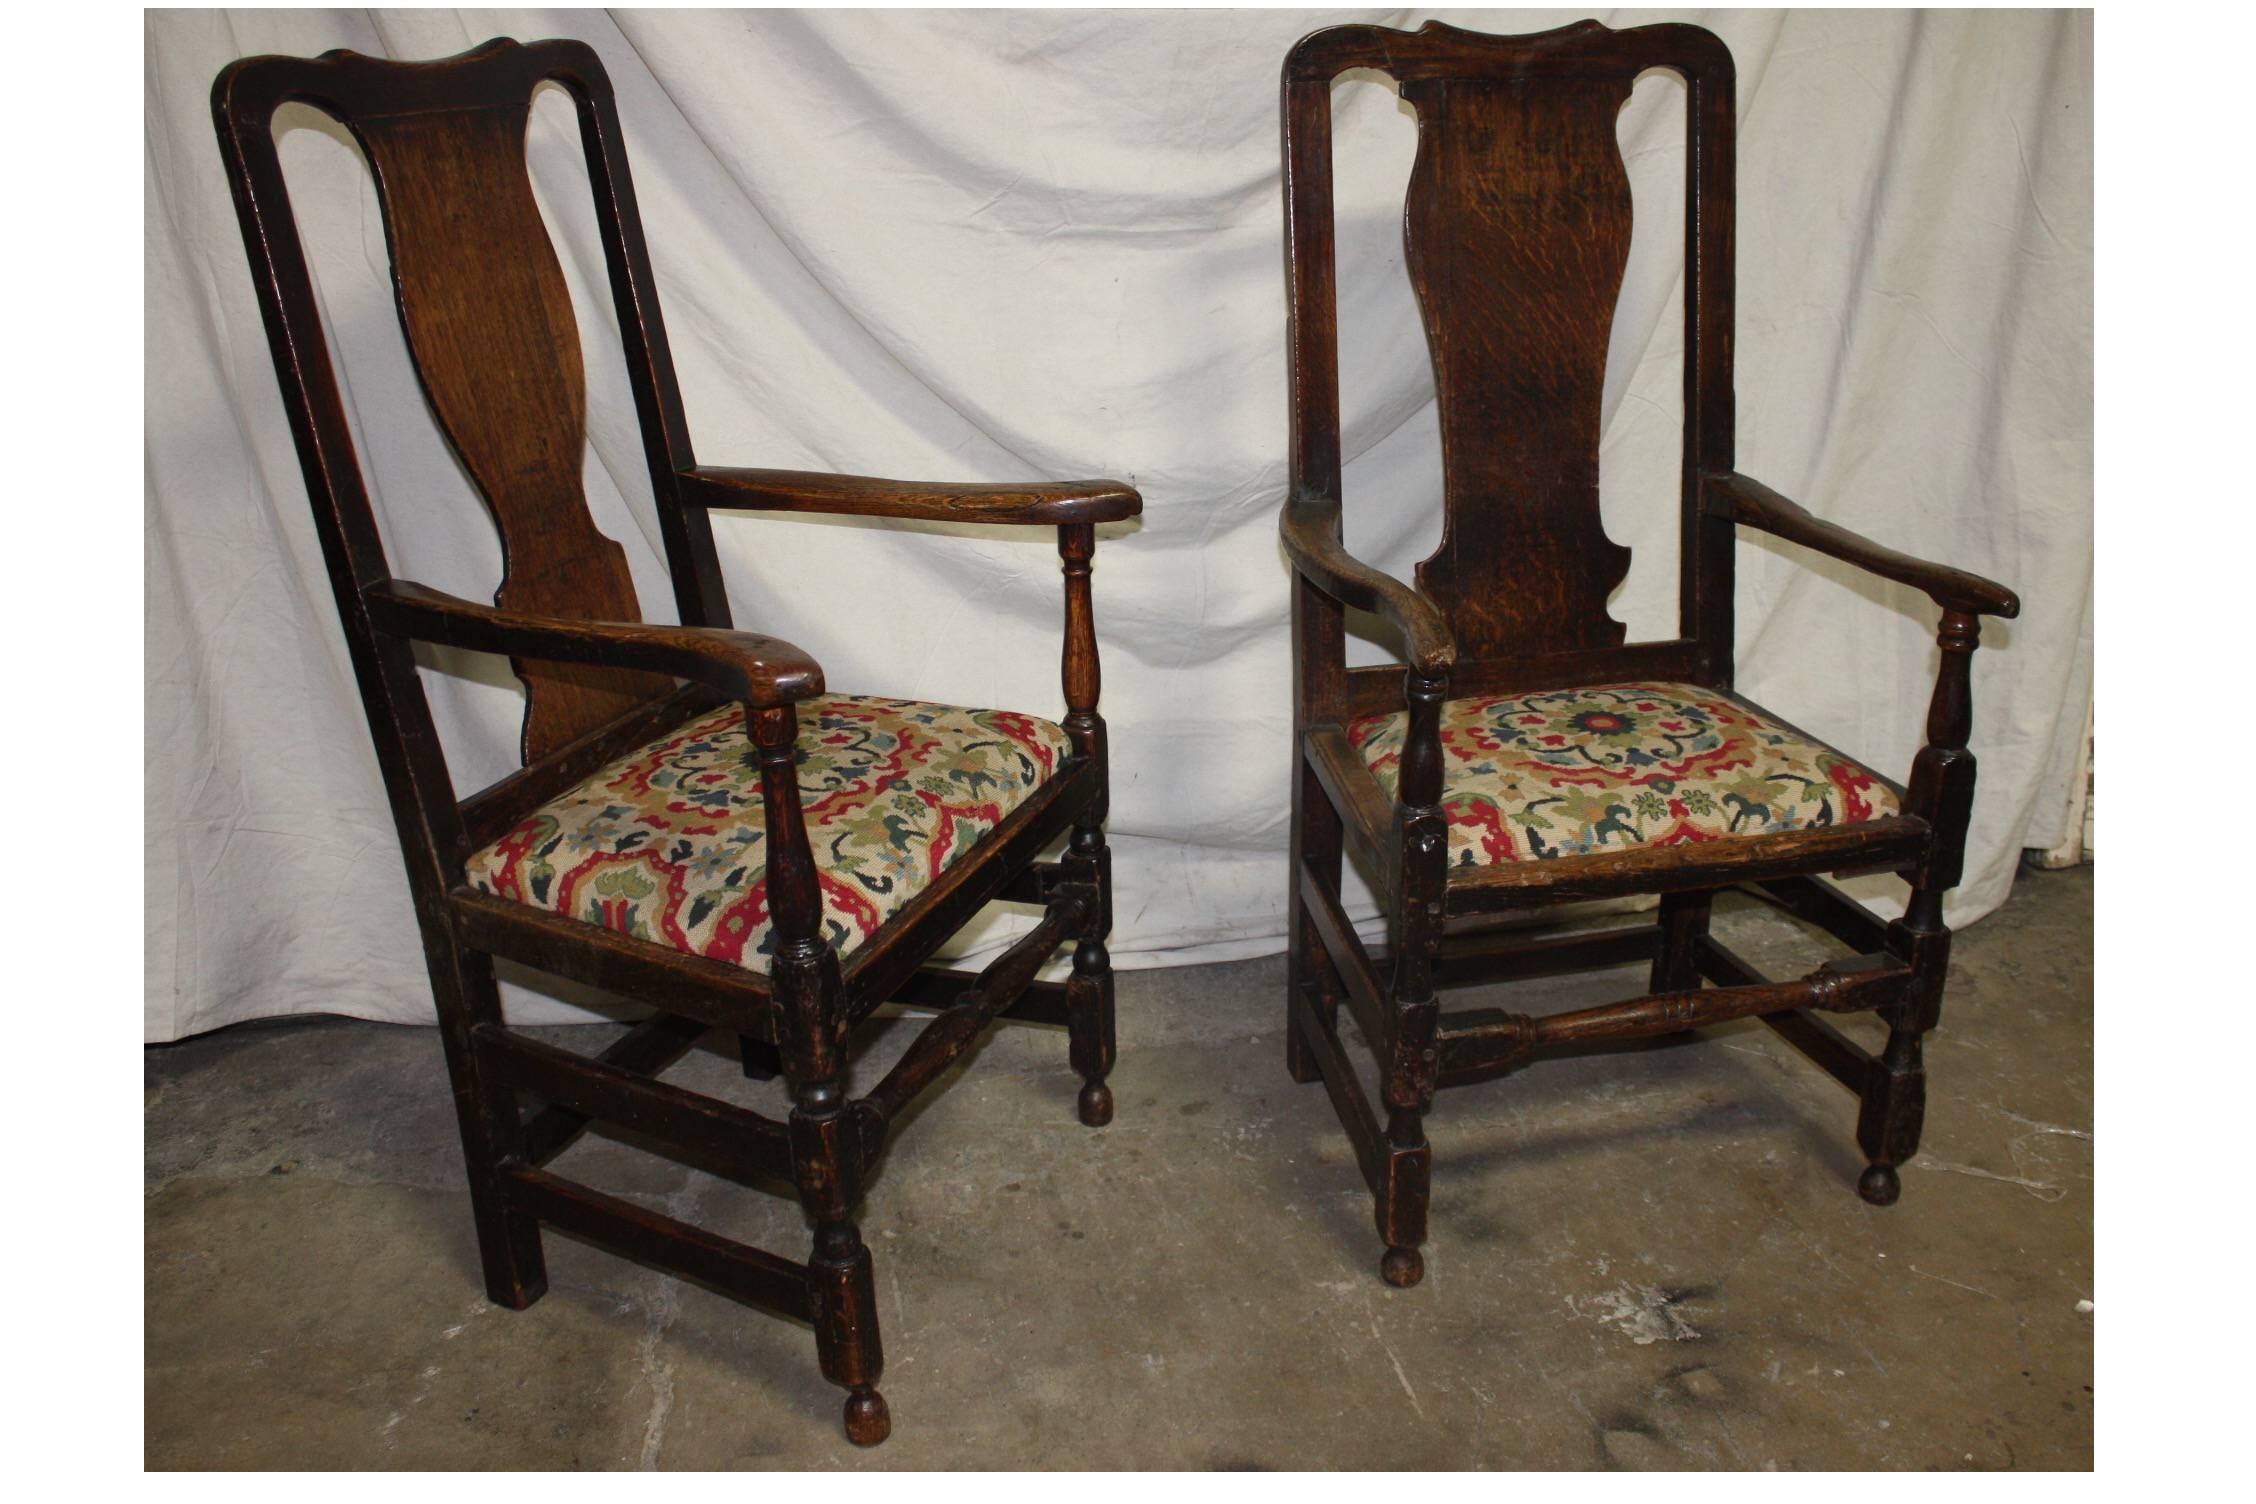 Magnificent Pair of 17th Century Armchairs 1